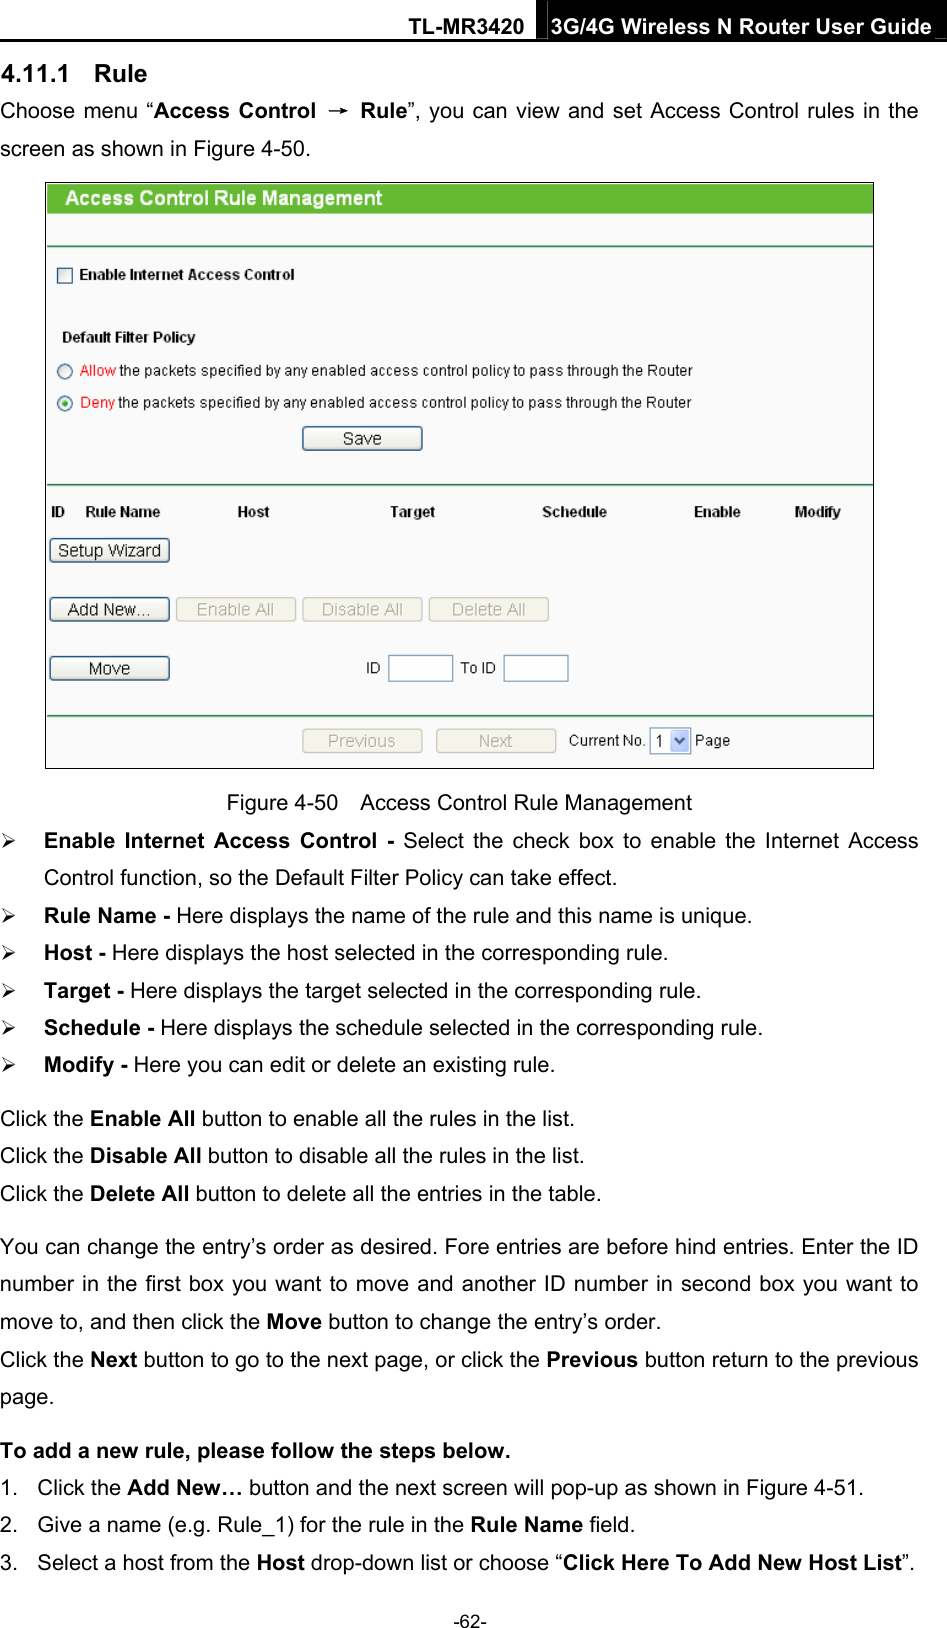 TL-MR3420 3G/4G Wireless N Router User Guide 4.11.1  Rule Choose menu “Access Control  → Rule”, you can view and set Access Control rules in the screen as shown in Figure 4-50.   Figure 4-50    Access Control Rule Management  Enable Internet Access Control - Select the check box to enable the Internet Access Control function, so the Default Filter Policy can take effect.    Rule Name - Here displays the name of the rule and this name is unique.    Host - Here displays the host selected in the corresponding rule.    Target - Here displays the target selected in the corresponding rule.    Schedule - Here displays the schedule selected in the corresponding rule.    Modify - Here you can edit or delete an existing rule.   Click the Enable All button to enable all the rules in the list. Click the Disable All button to disable all the rules in the list. Click the Delete All button to delete all the entries in the table. You can change the entry’s order as desired. Fore entries are before hind entries. Enter the ID number in the first box you want to move and another ID number in second box you want to move to, and then click the Move button to change the entry’s order. Click the Next button to go to the next page, or click the Previous button return to the previous page. To add a new rule, please follow the steps below. 1. Click the Add New… button and the next screen will pop-up as shown in Figure 4-51. 2.  Give a name (e.g. Rule_1) for the rule in the Rule Name field. 3.  Select a host from the Host drop-down list or choose “Click Here To Add New Host List”. -62- 